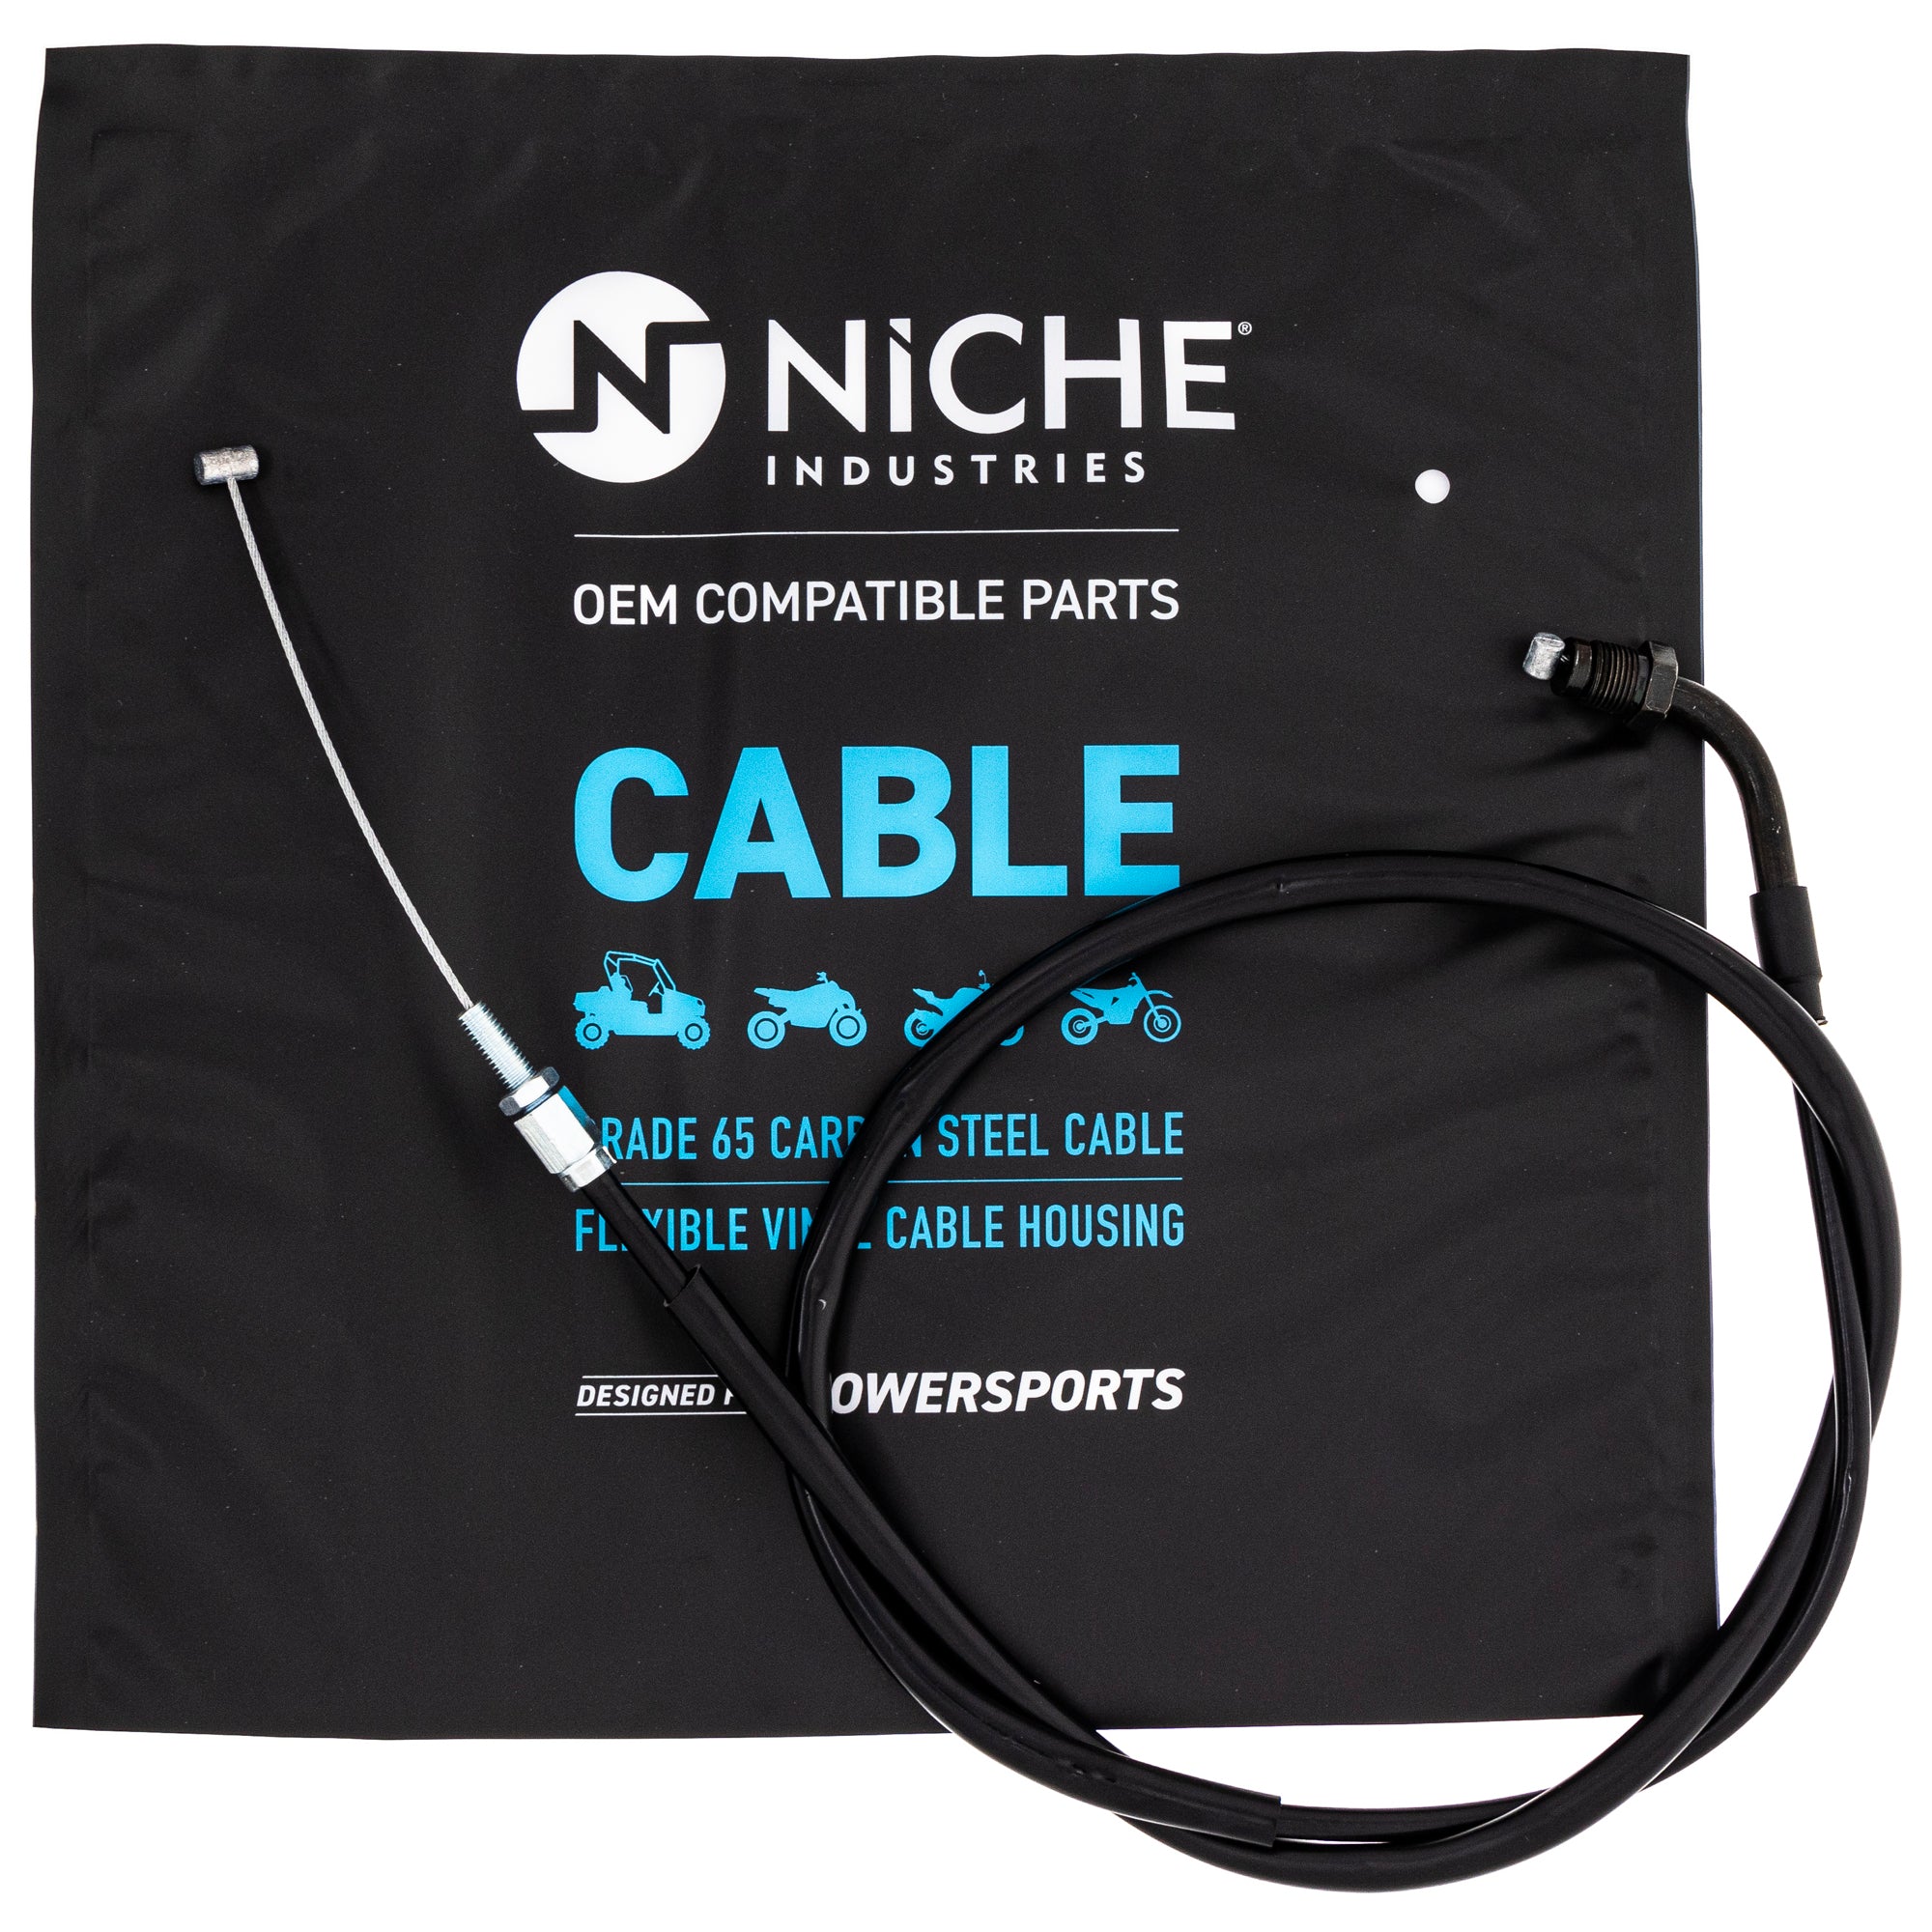 NICHE 519-CCB2251L Push Throttle Cable for zOTHER Shadow Nighthawk